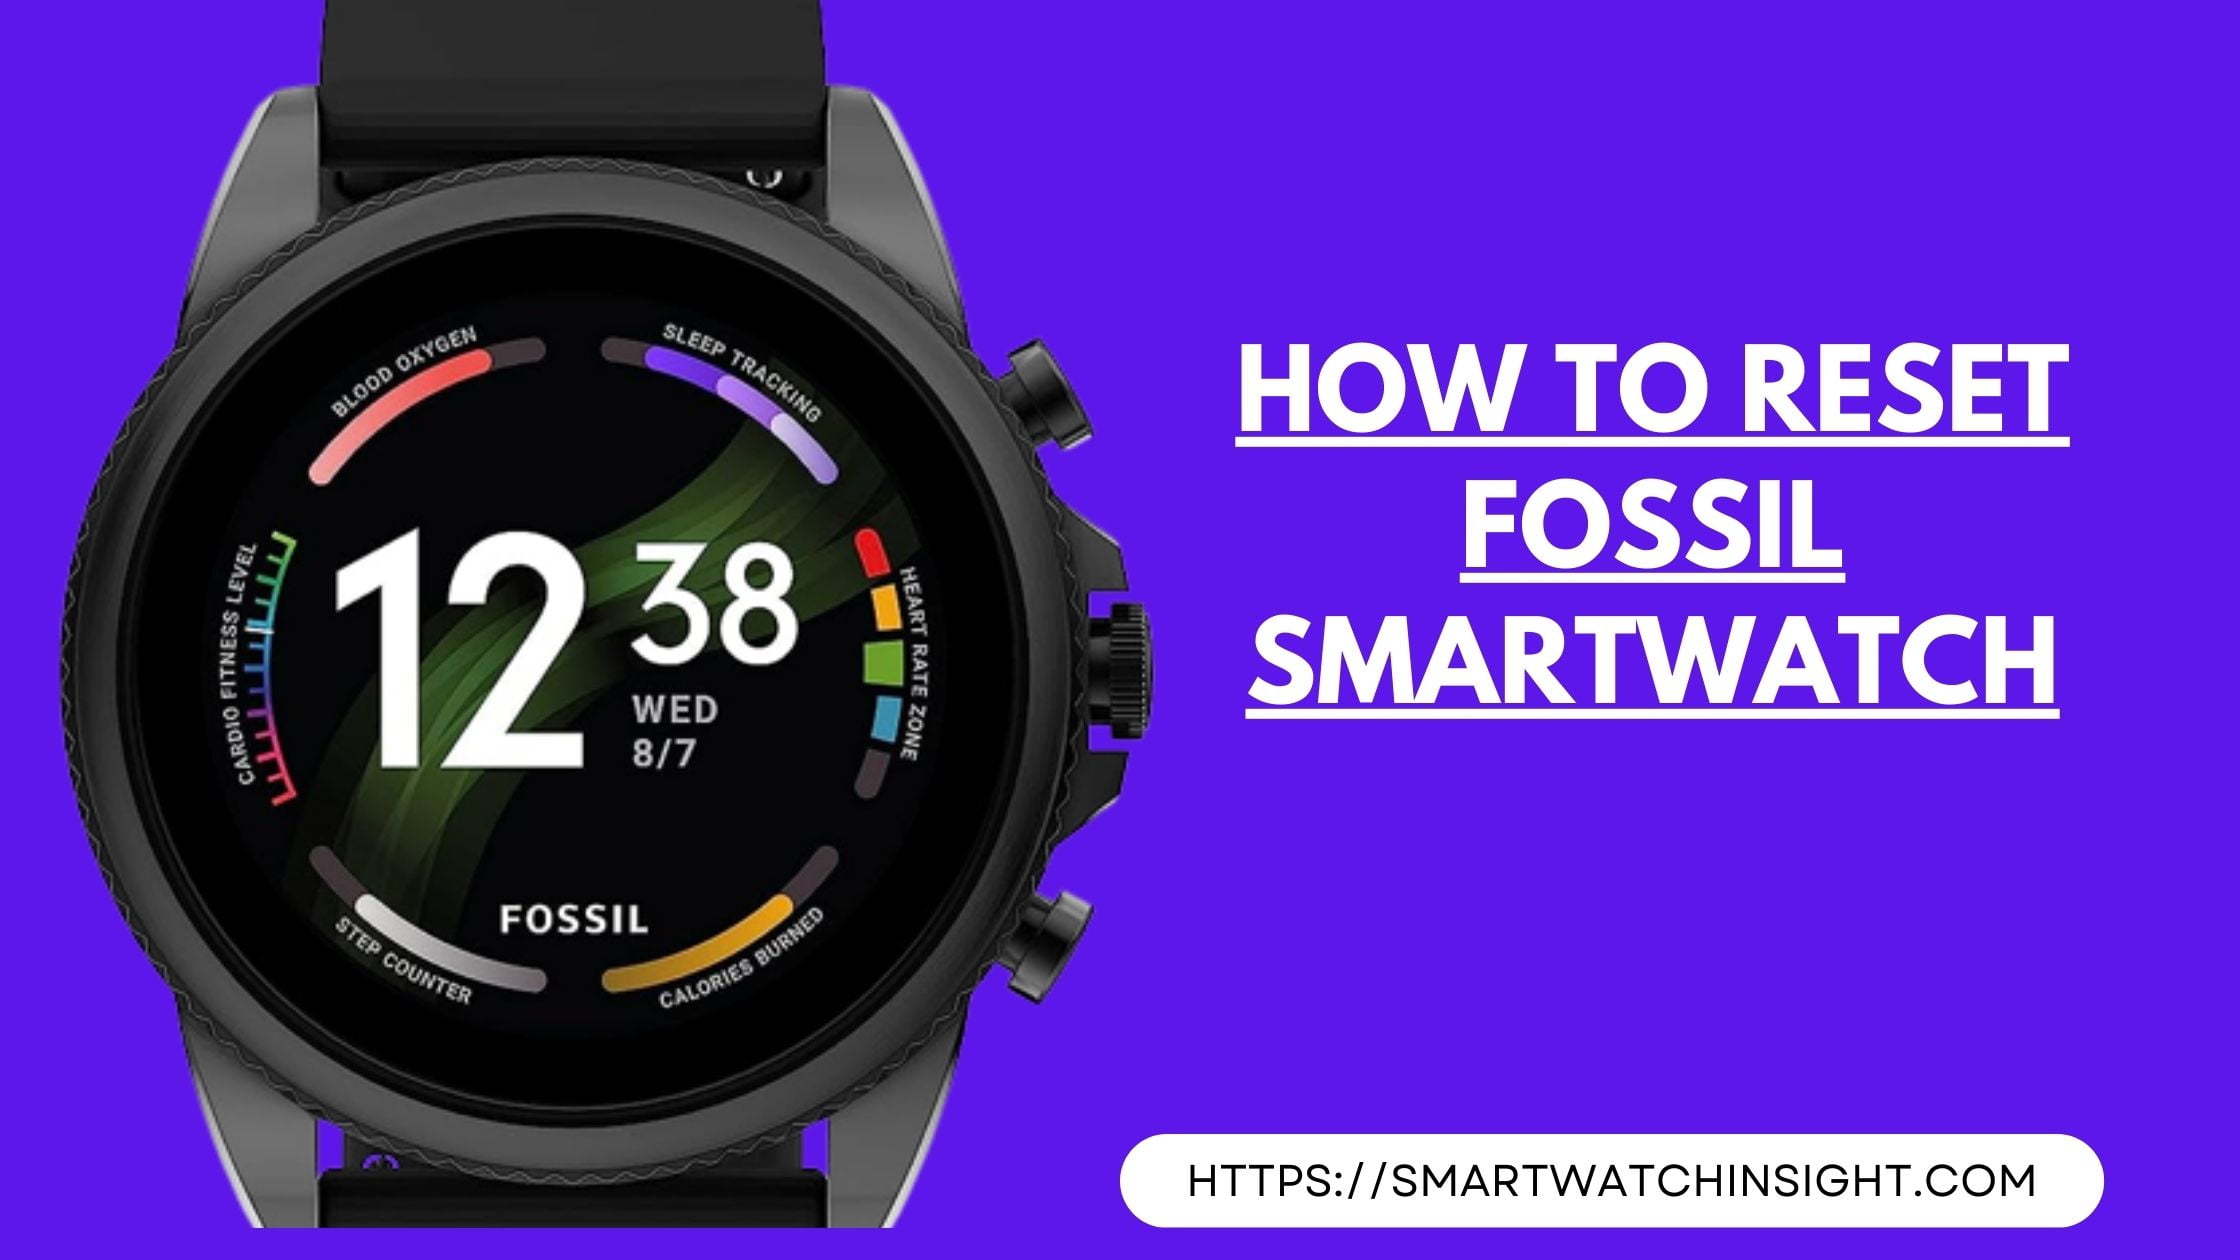 How to Reset Fossil Smartwatch